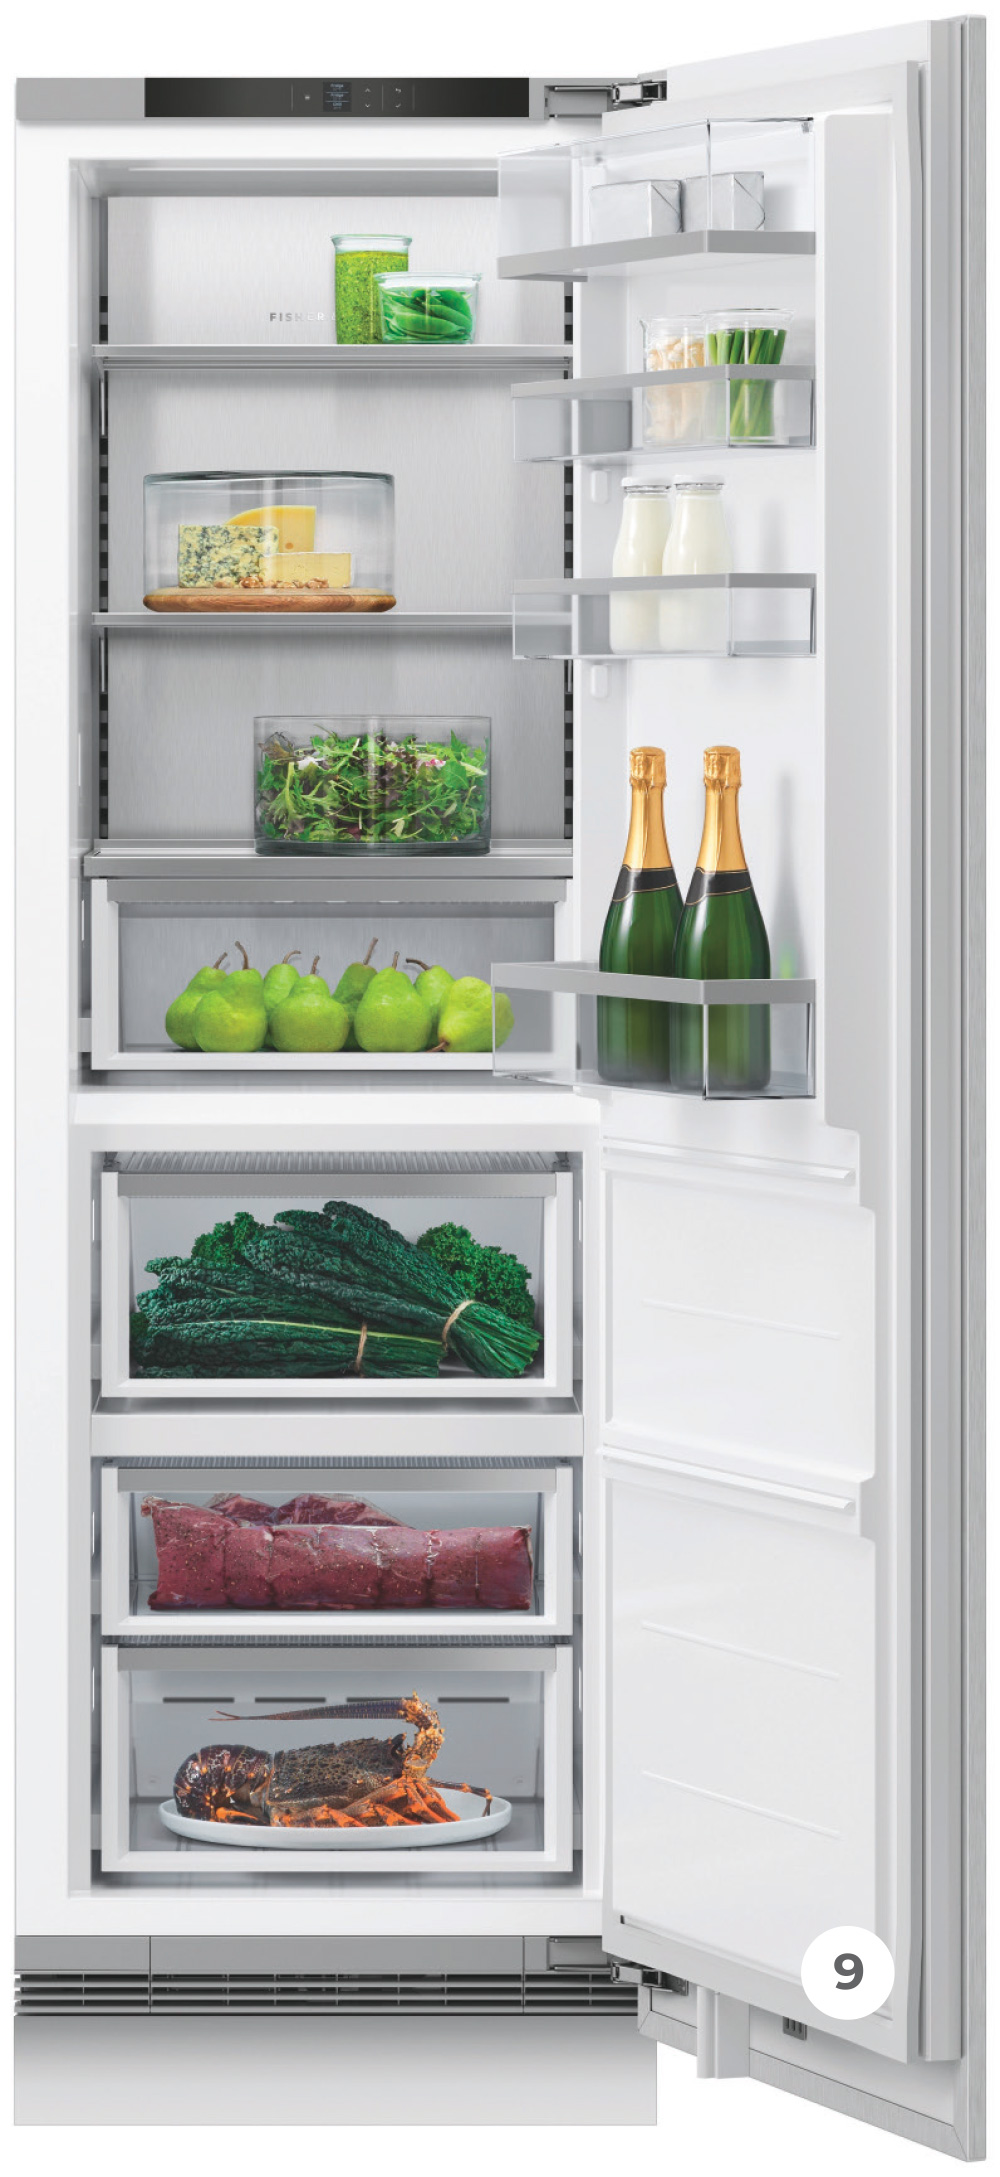 Fisher & Paykel 24-INCH PANEL-READY Built-In Full/All Smart Refrigerator